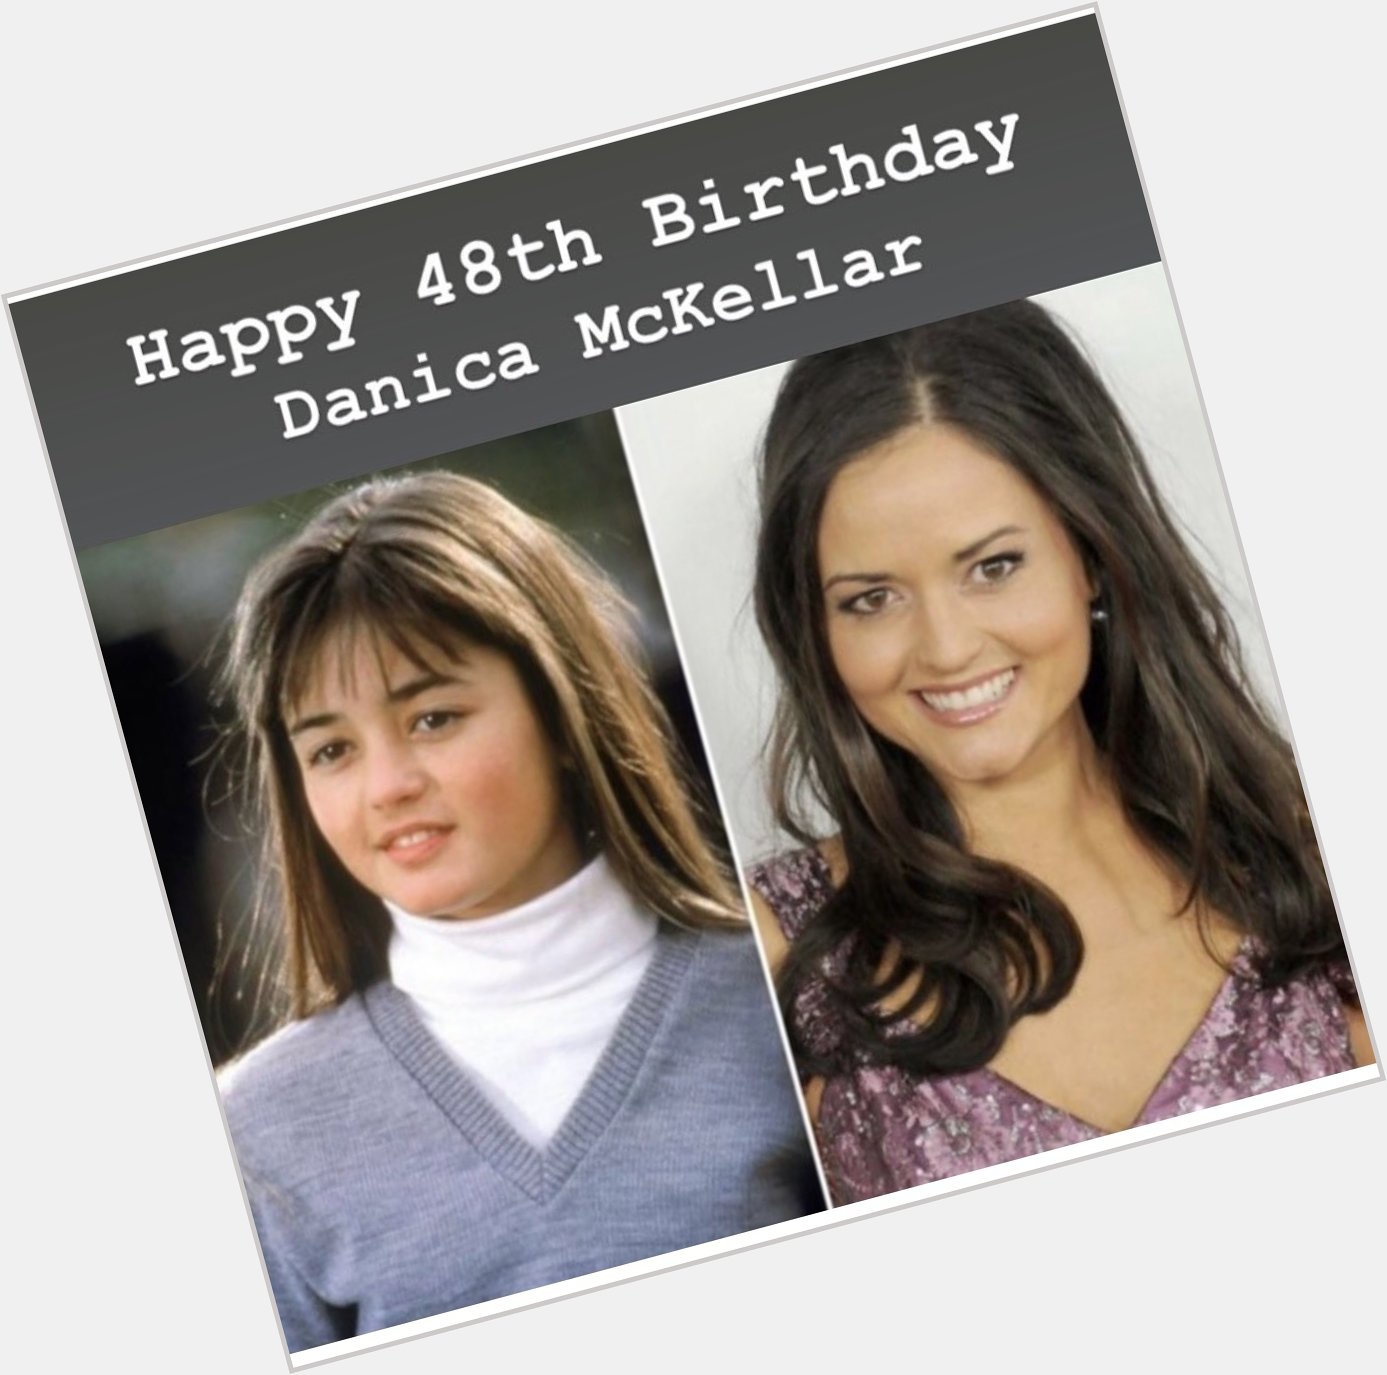  then and now with birthday goddess of the hour: Happy Birthday Danica Mckellar        